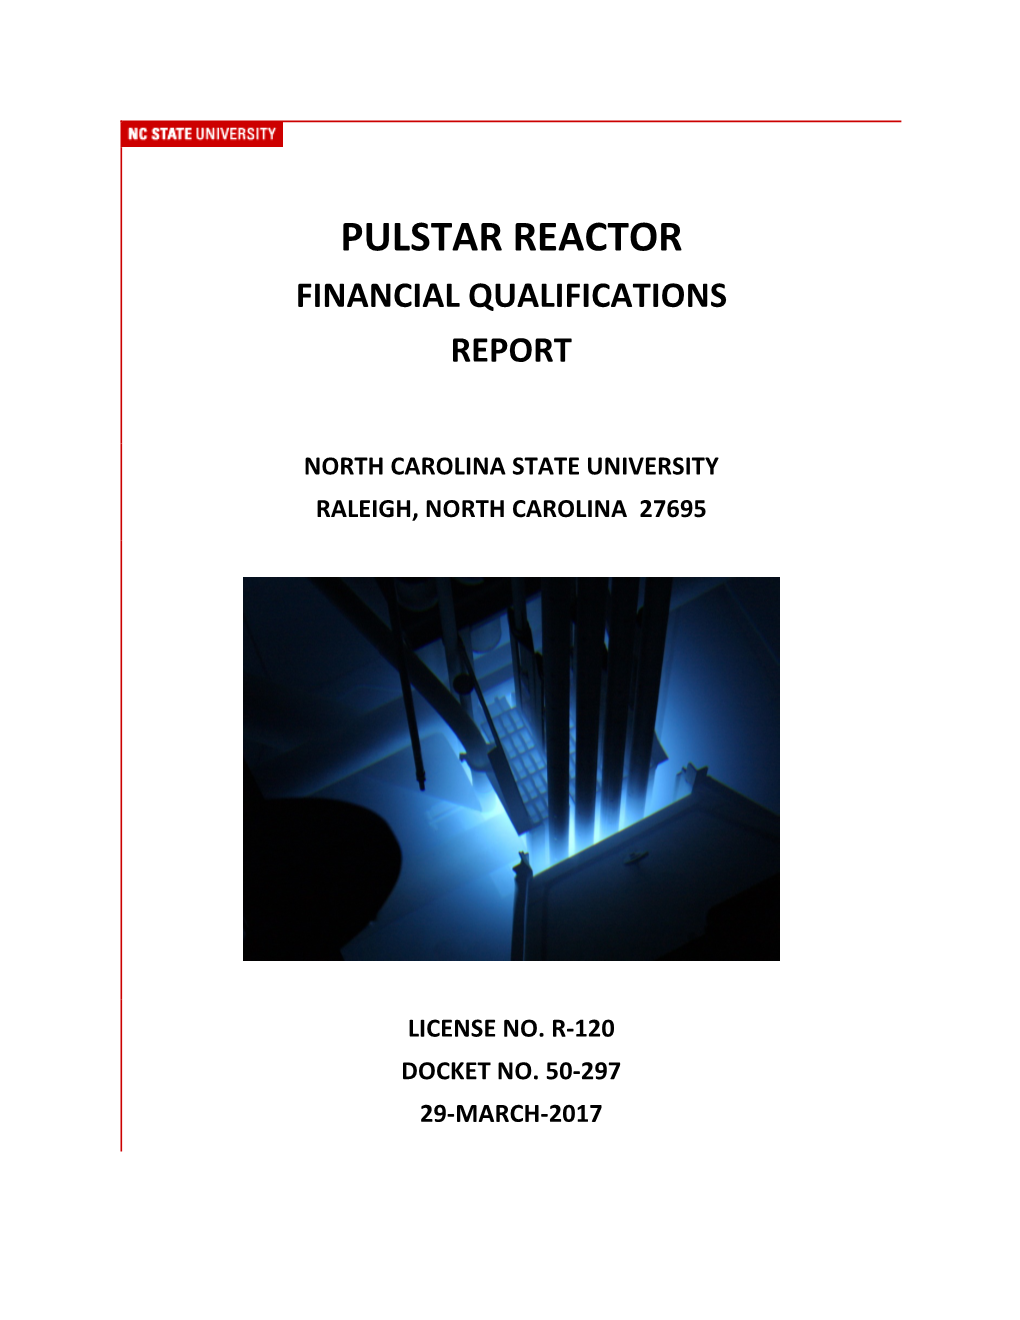 Submittal of License Renewal Package for PULSTAR Reactor